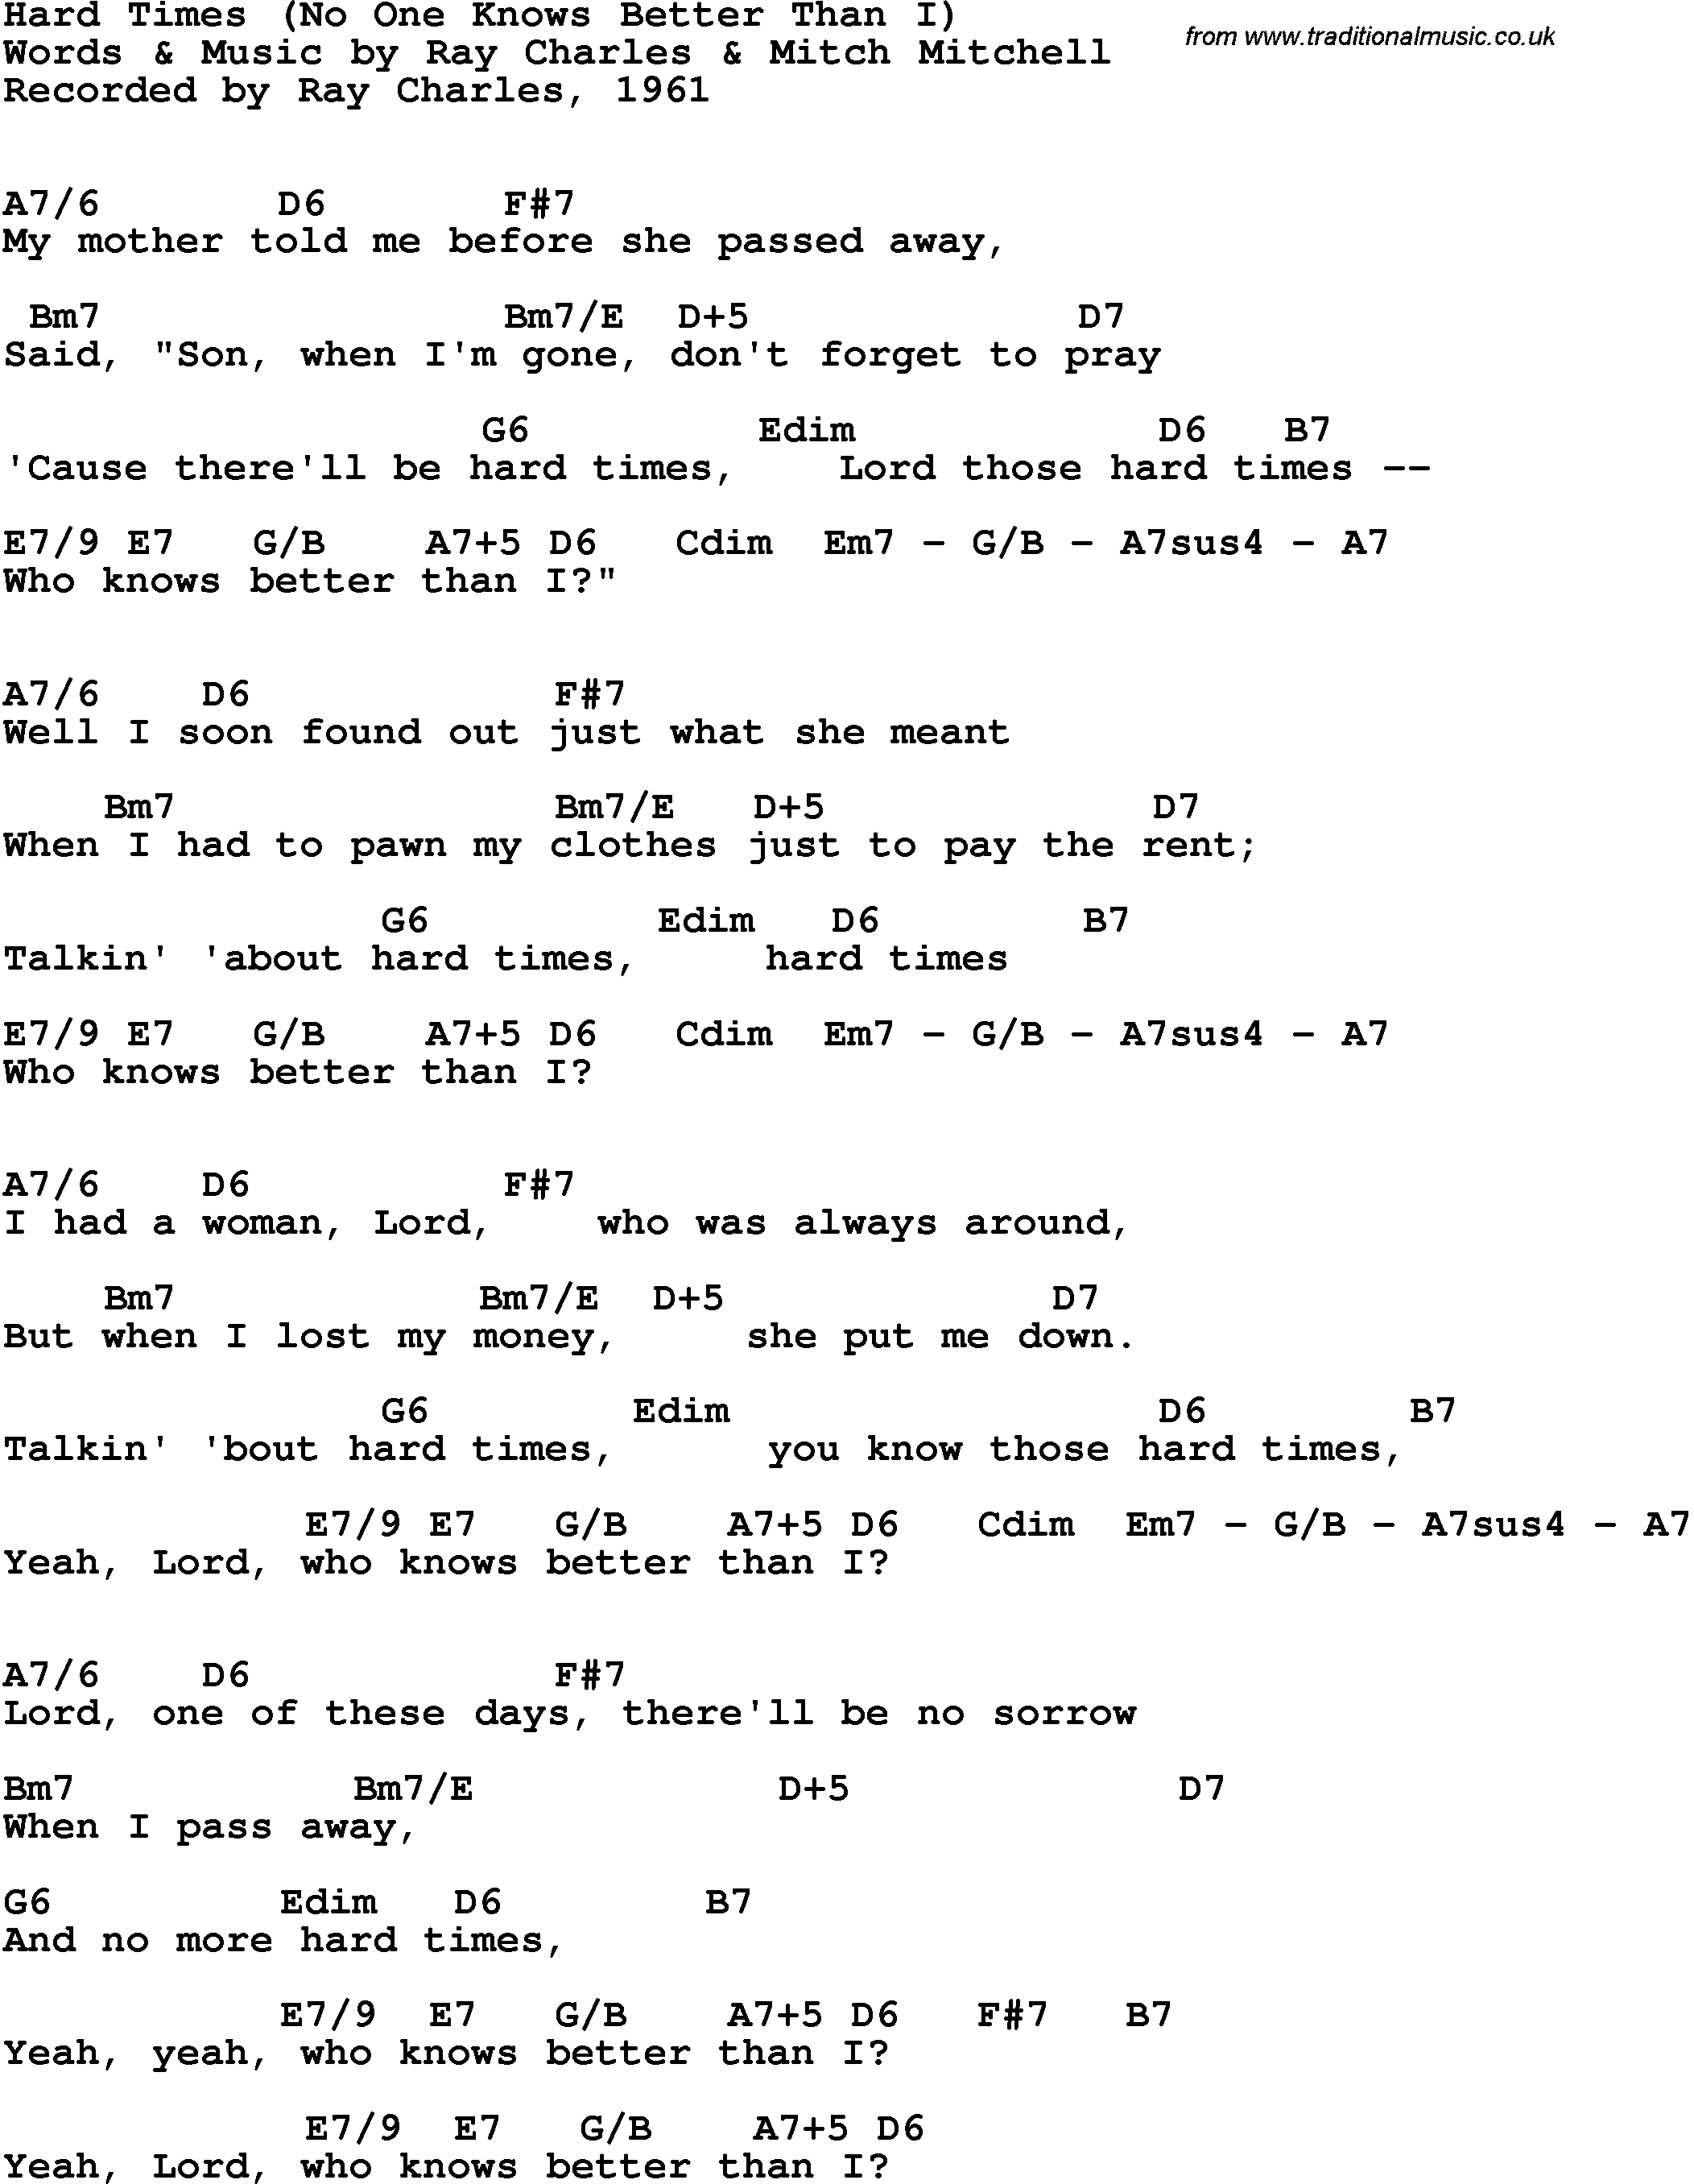 Song Lyrics with guitar chords for Hard Times (No One Knows Better Than I) - Ray Charles, 1961